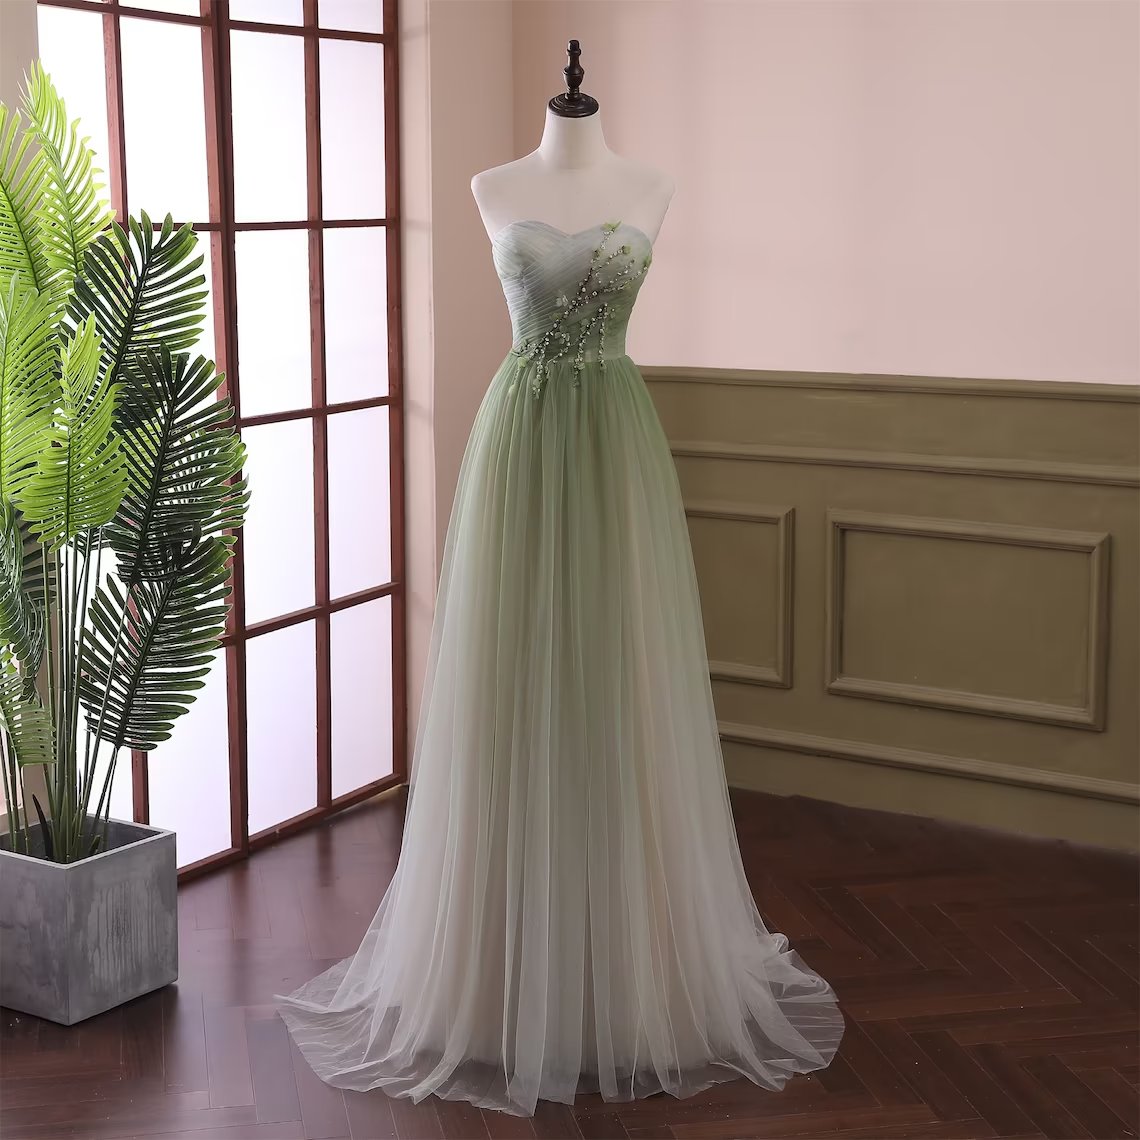  Green Gradient Tulle Sweetheart Beaded Long Formal Dress, Green Evening Party Dresses